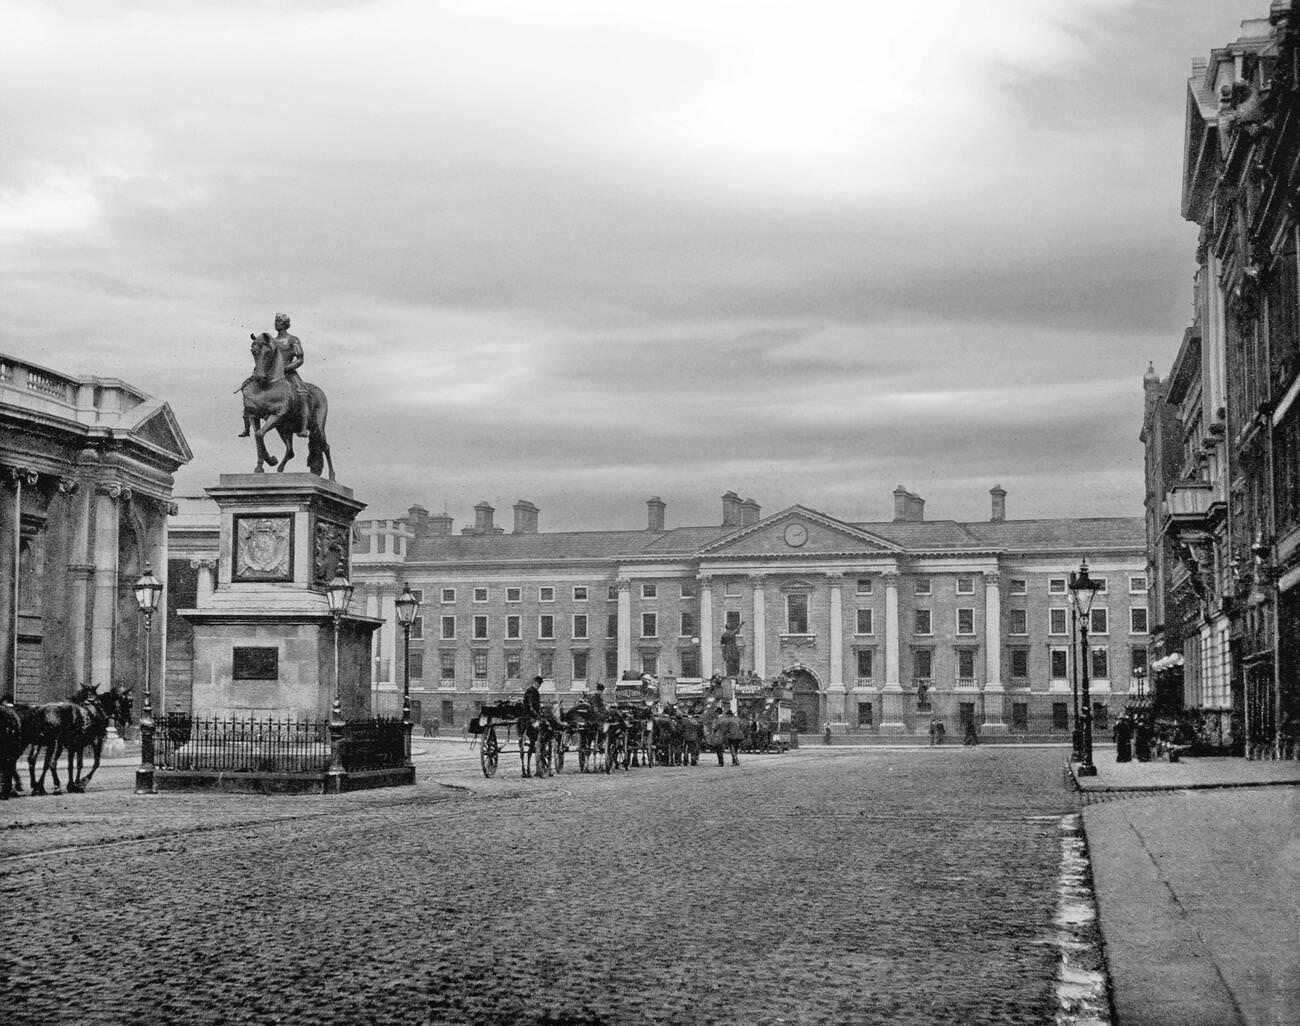 The statue of King William III on horseback in the centre of College Green, Dublin.